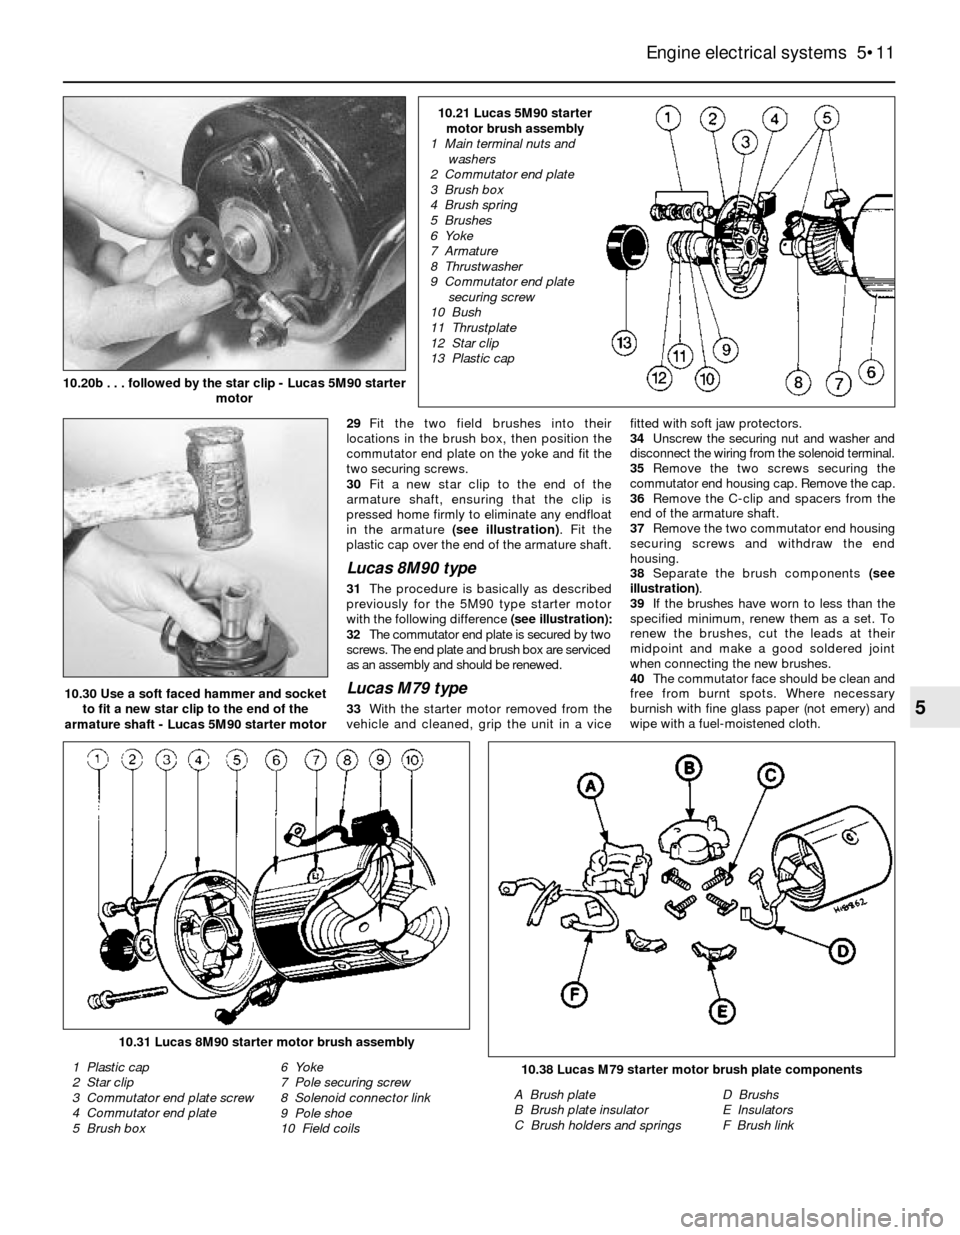 FORD SIERRA 1992 2.G Engine Electrical Systems Workshop Manual 29Fit the two field brushes into their
locations in the brush box, then position the
commutator end plate on the yoke and fit the
two securing screws.
30Fit a new star clip to the end of the
armature 